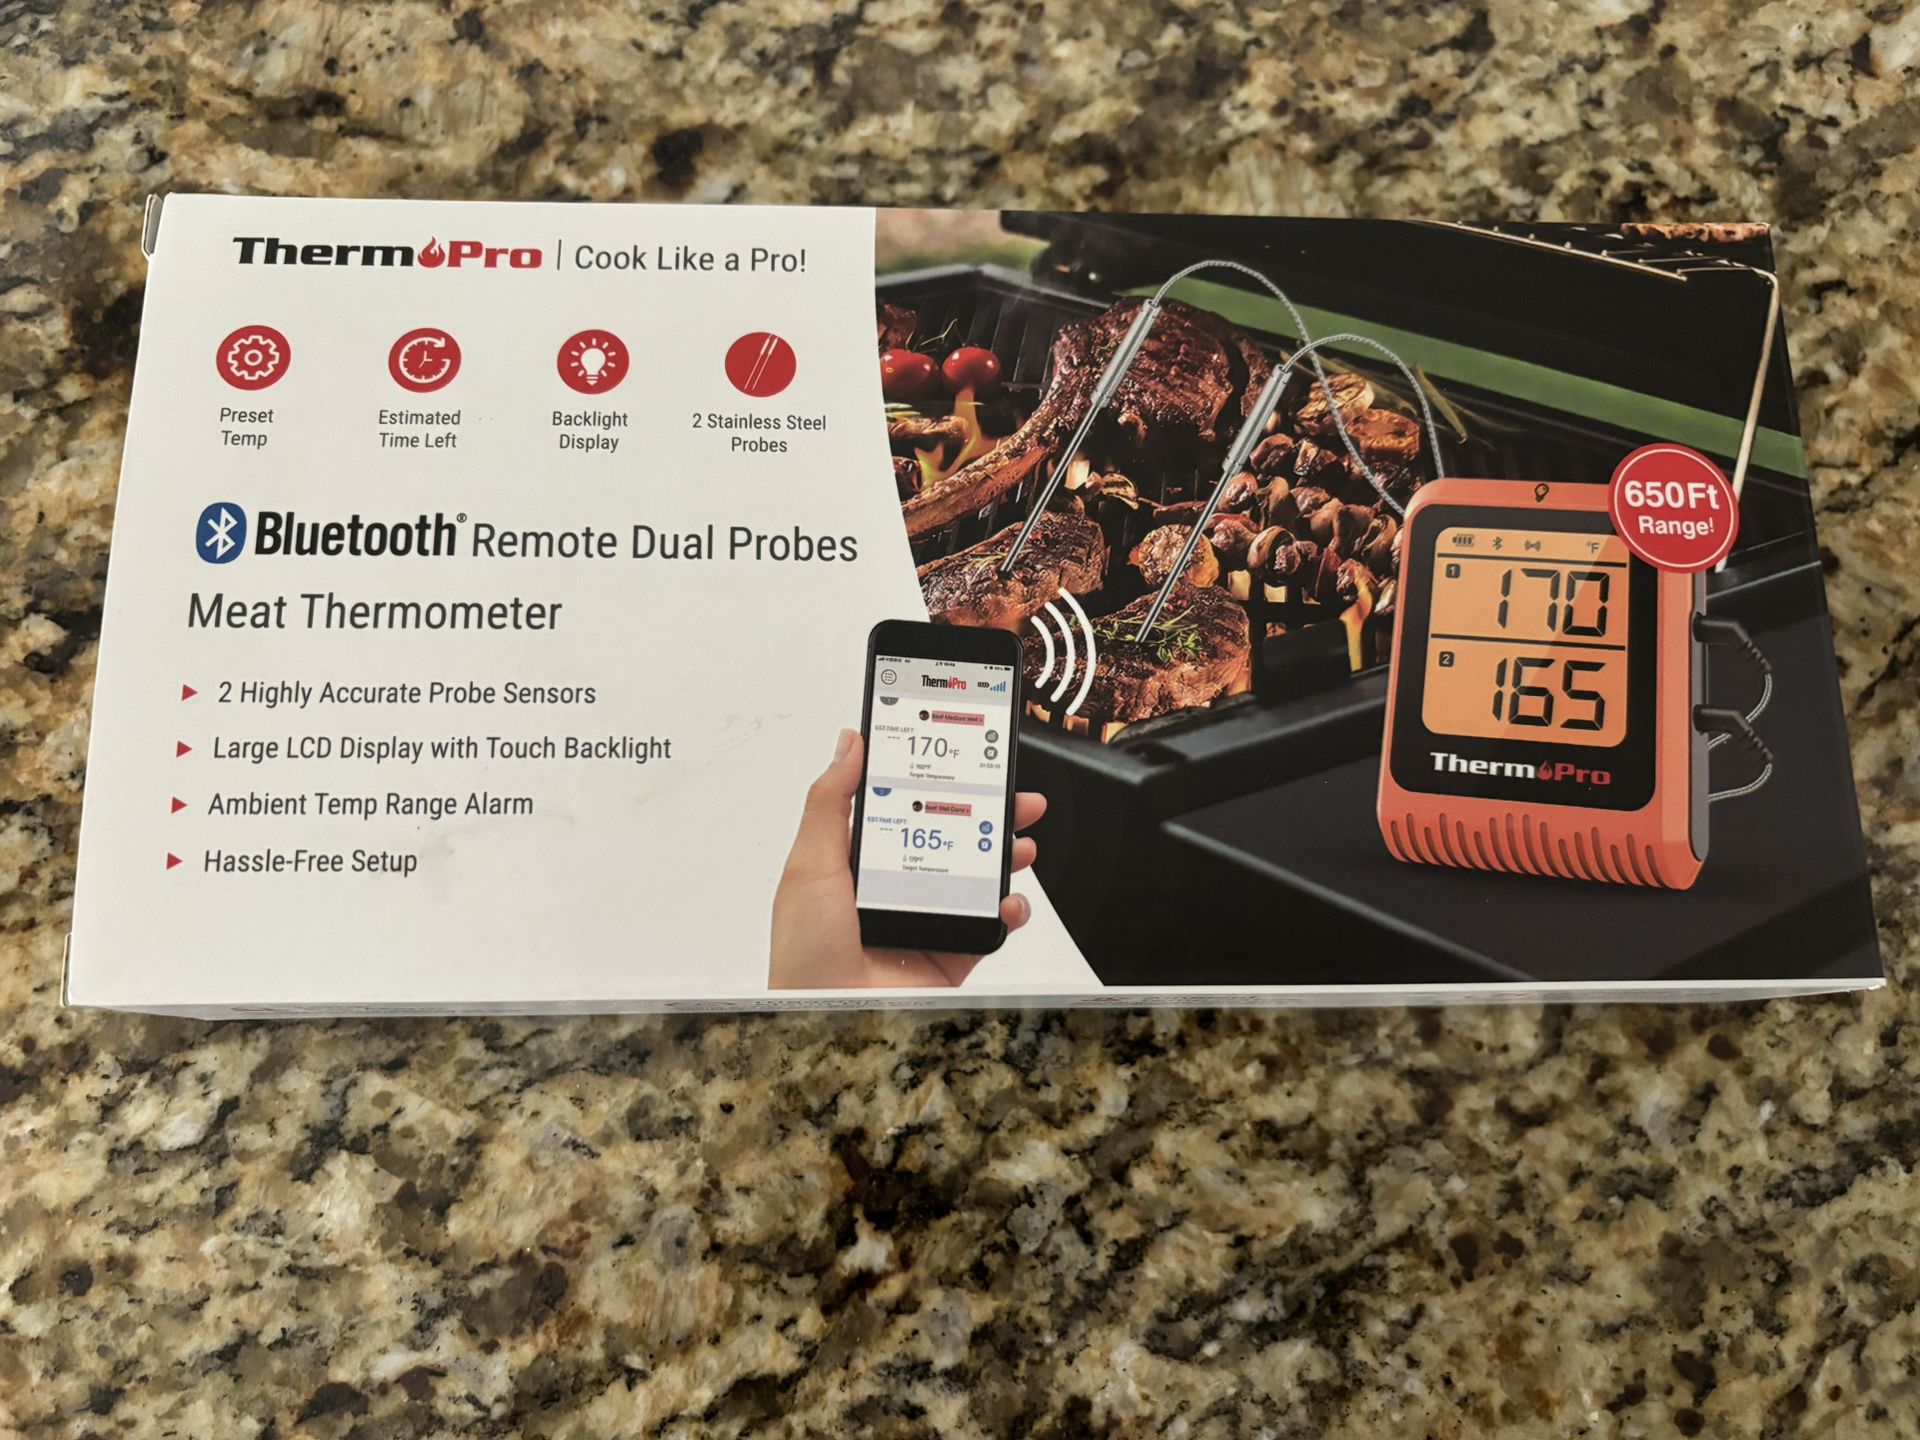 ThermoPro Wireless Meat Thermometer of 650FT for Smoker Oven, Bluetooth Grill Thermometer with Dual Probes